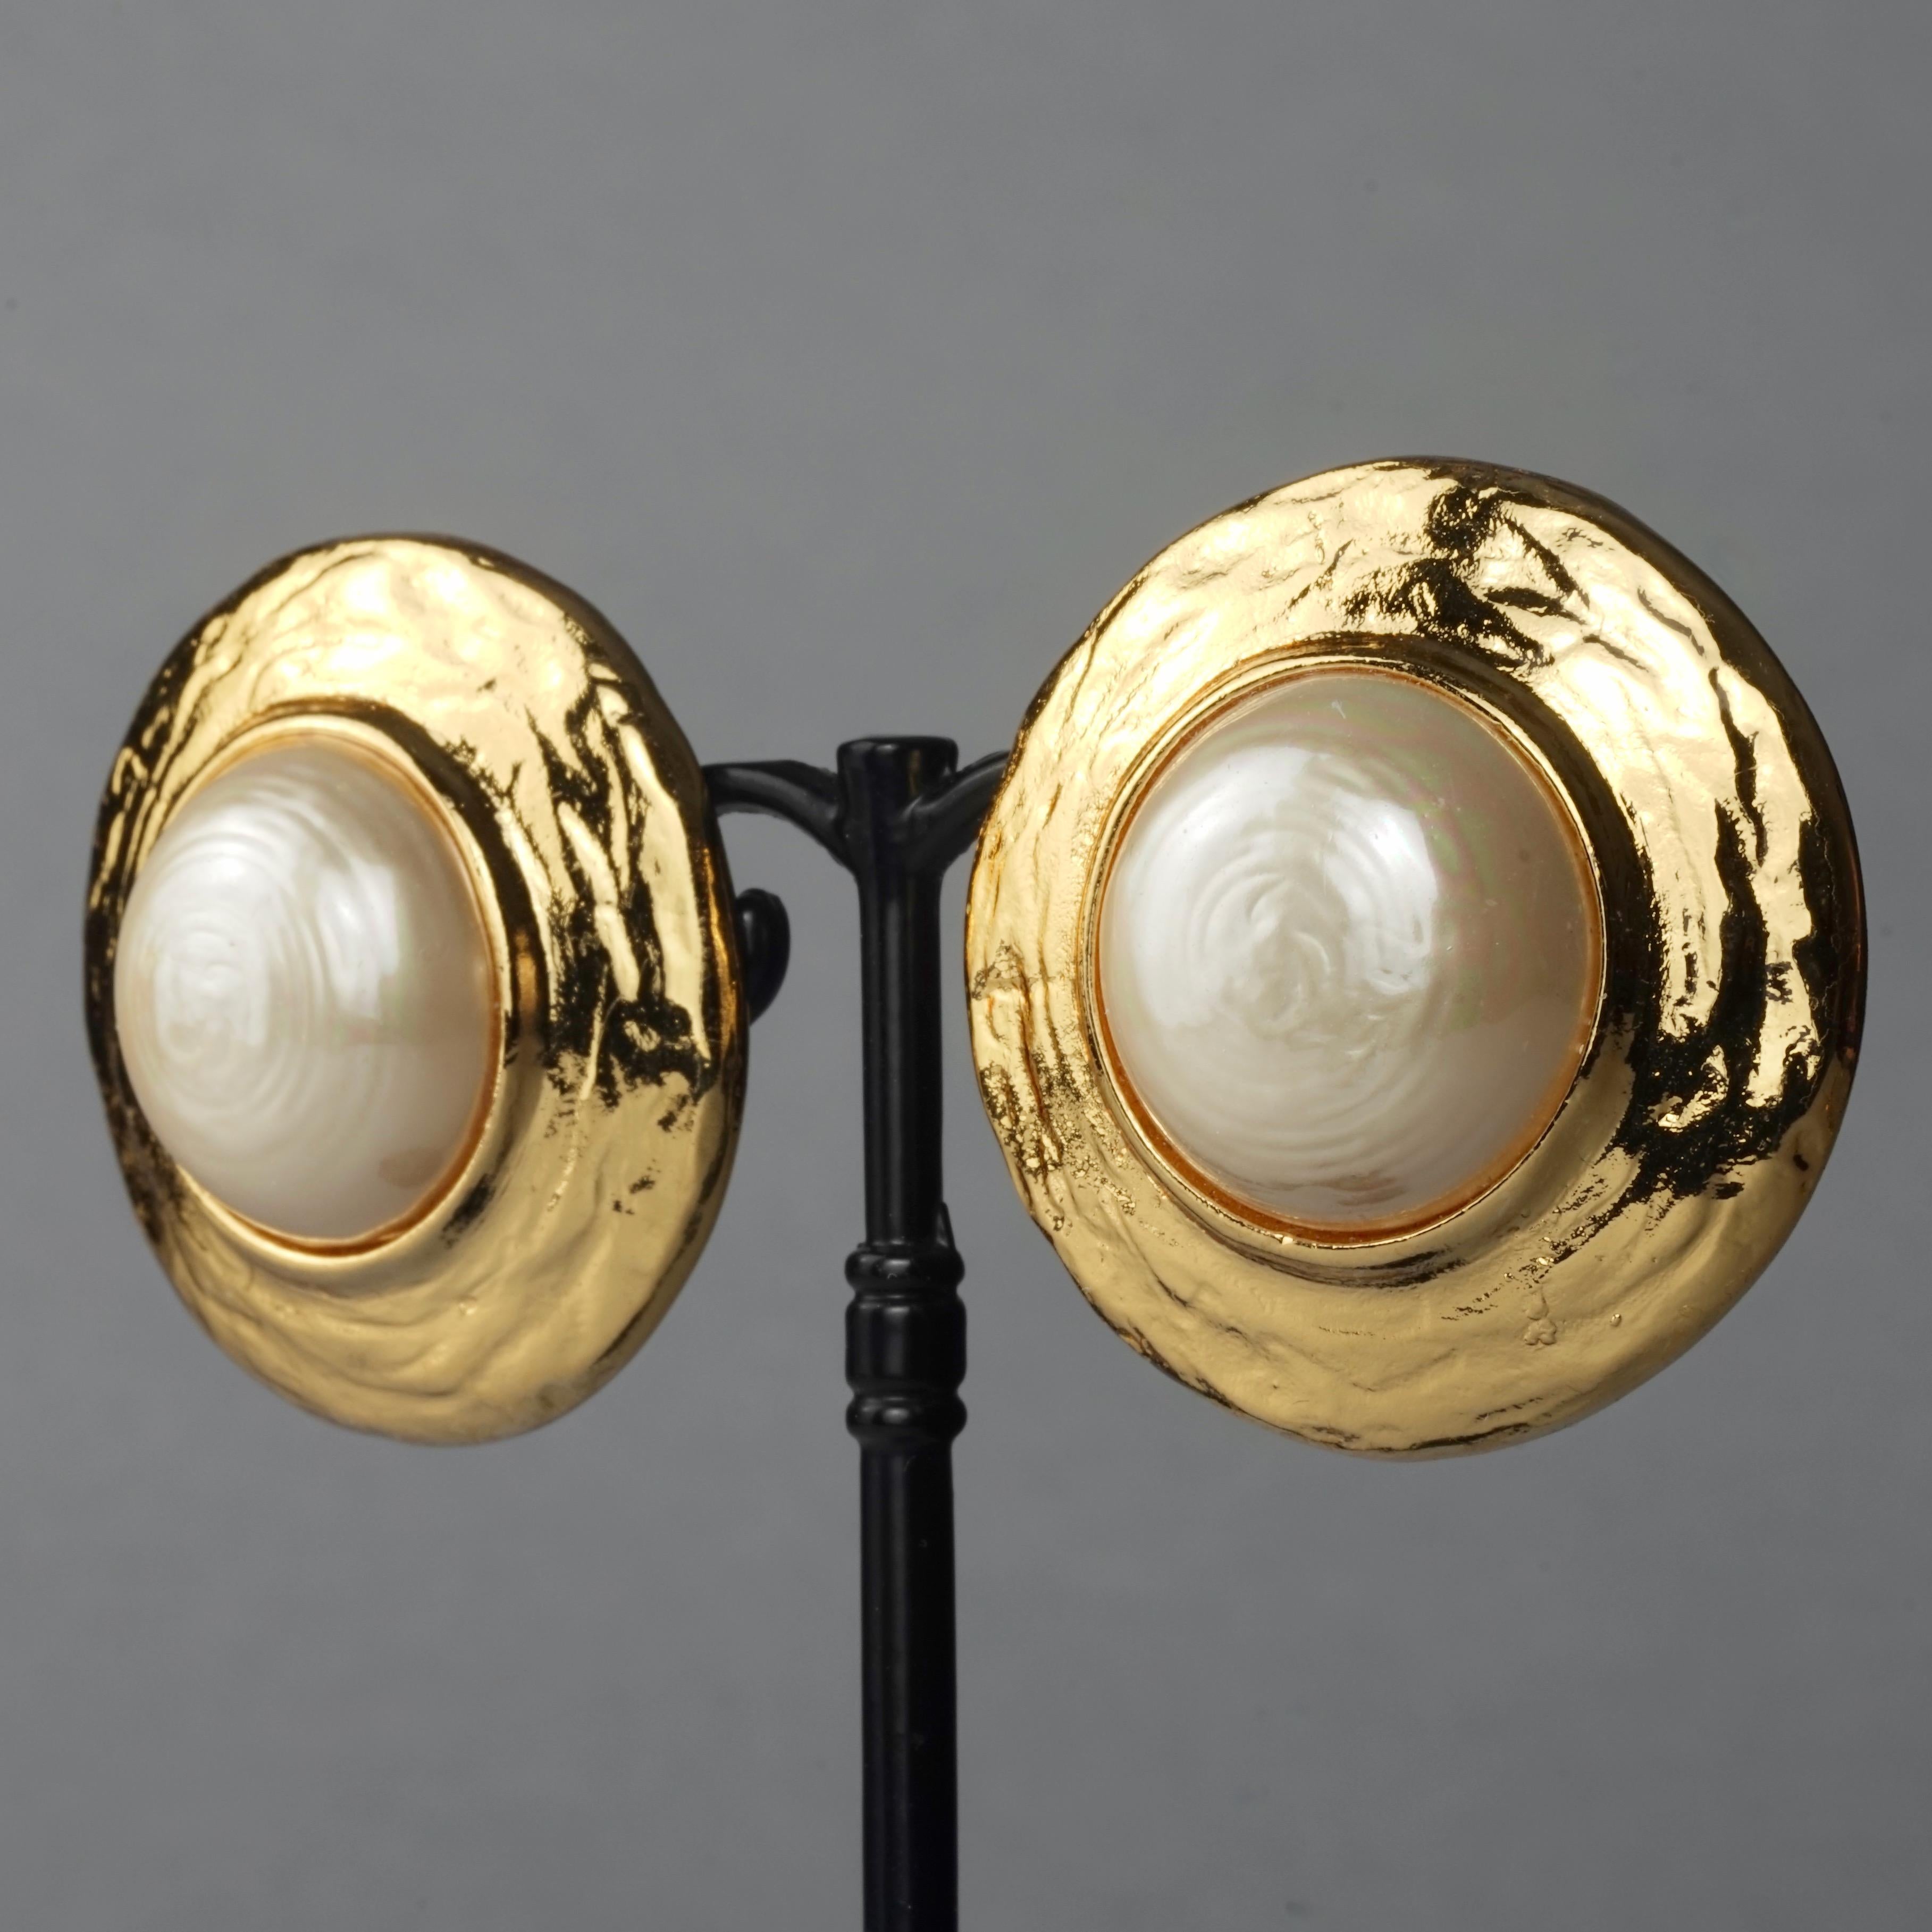 Vintage YVES SAINT LAURENT Ysl Pearl Textured Disc Earrings In Excellent Condition For Sale In Kingersheim, Alsace